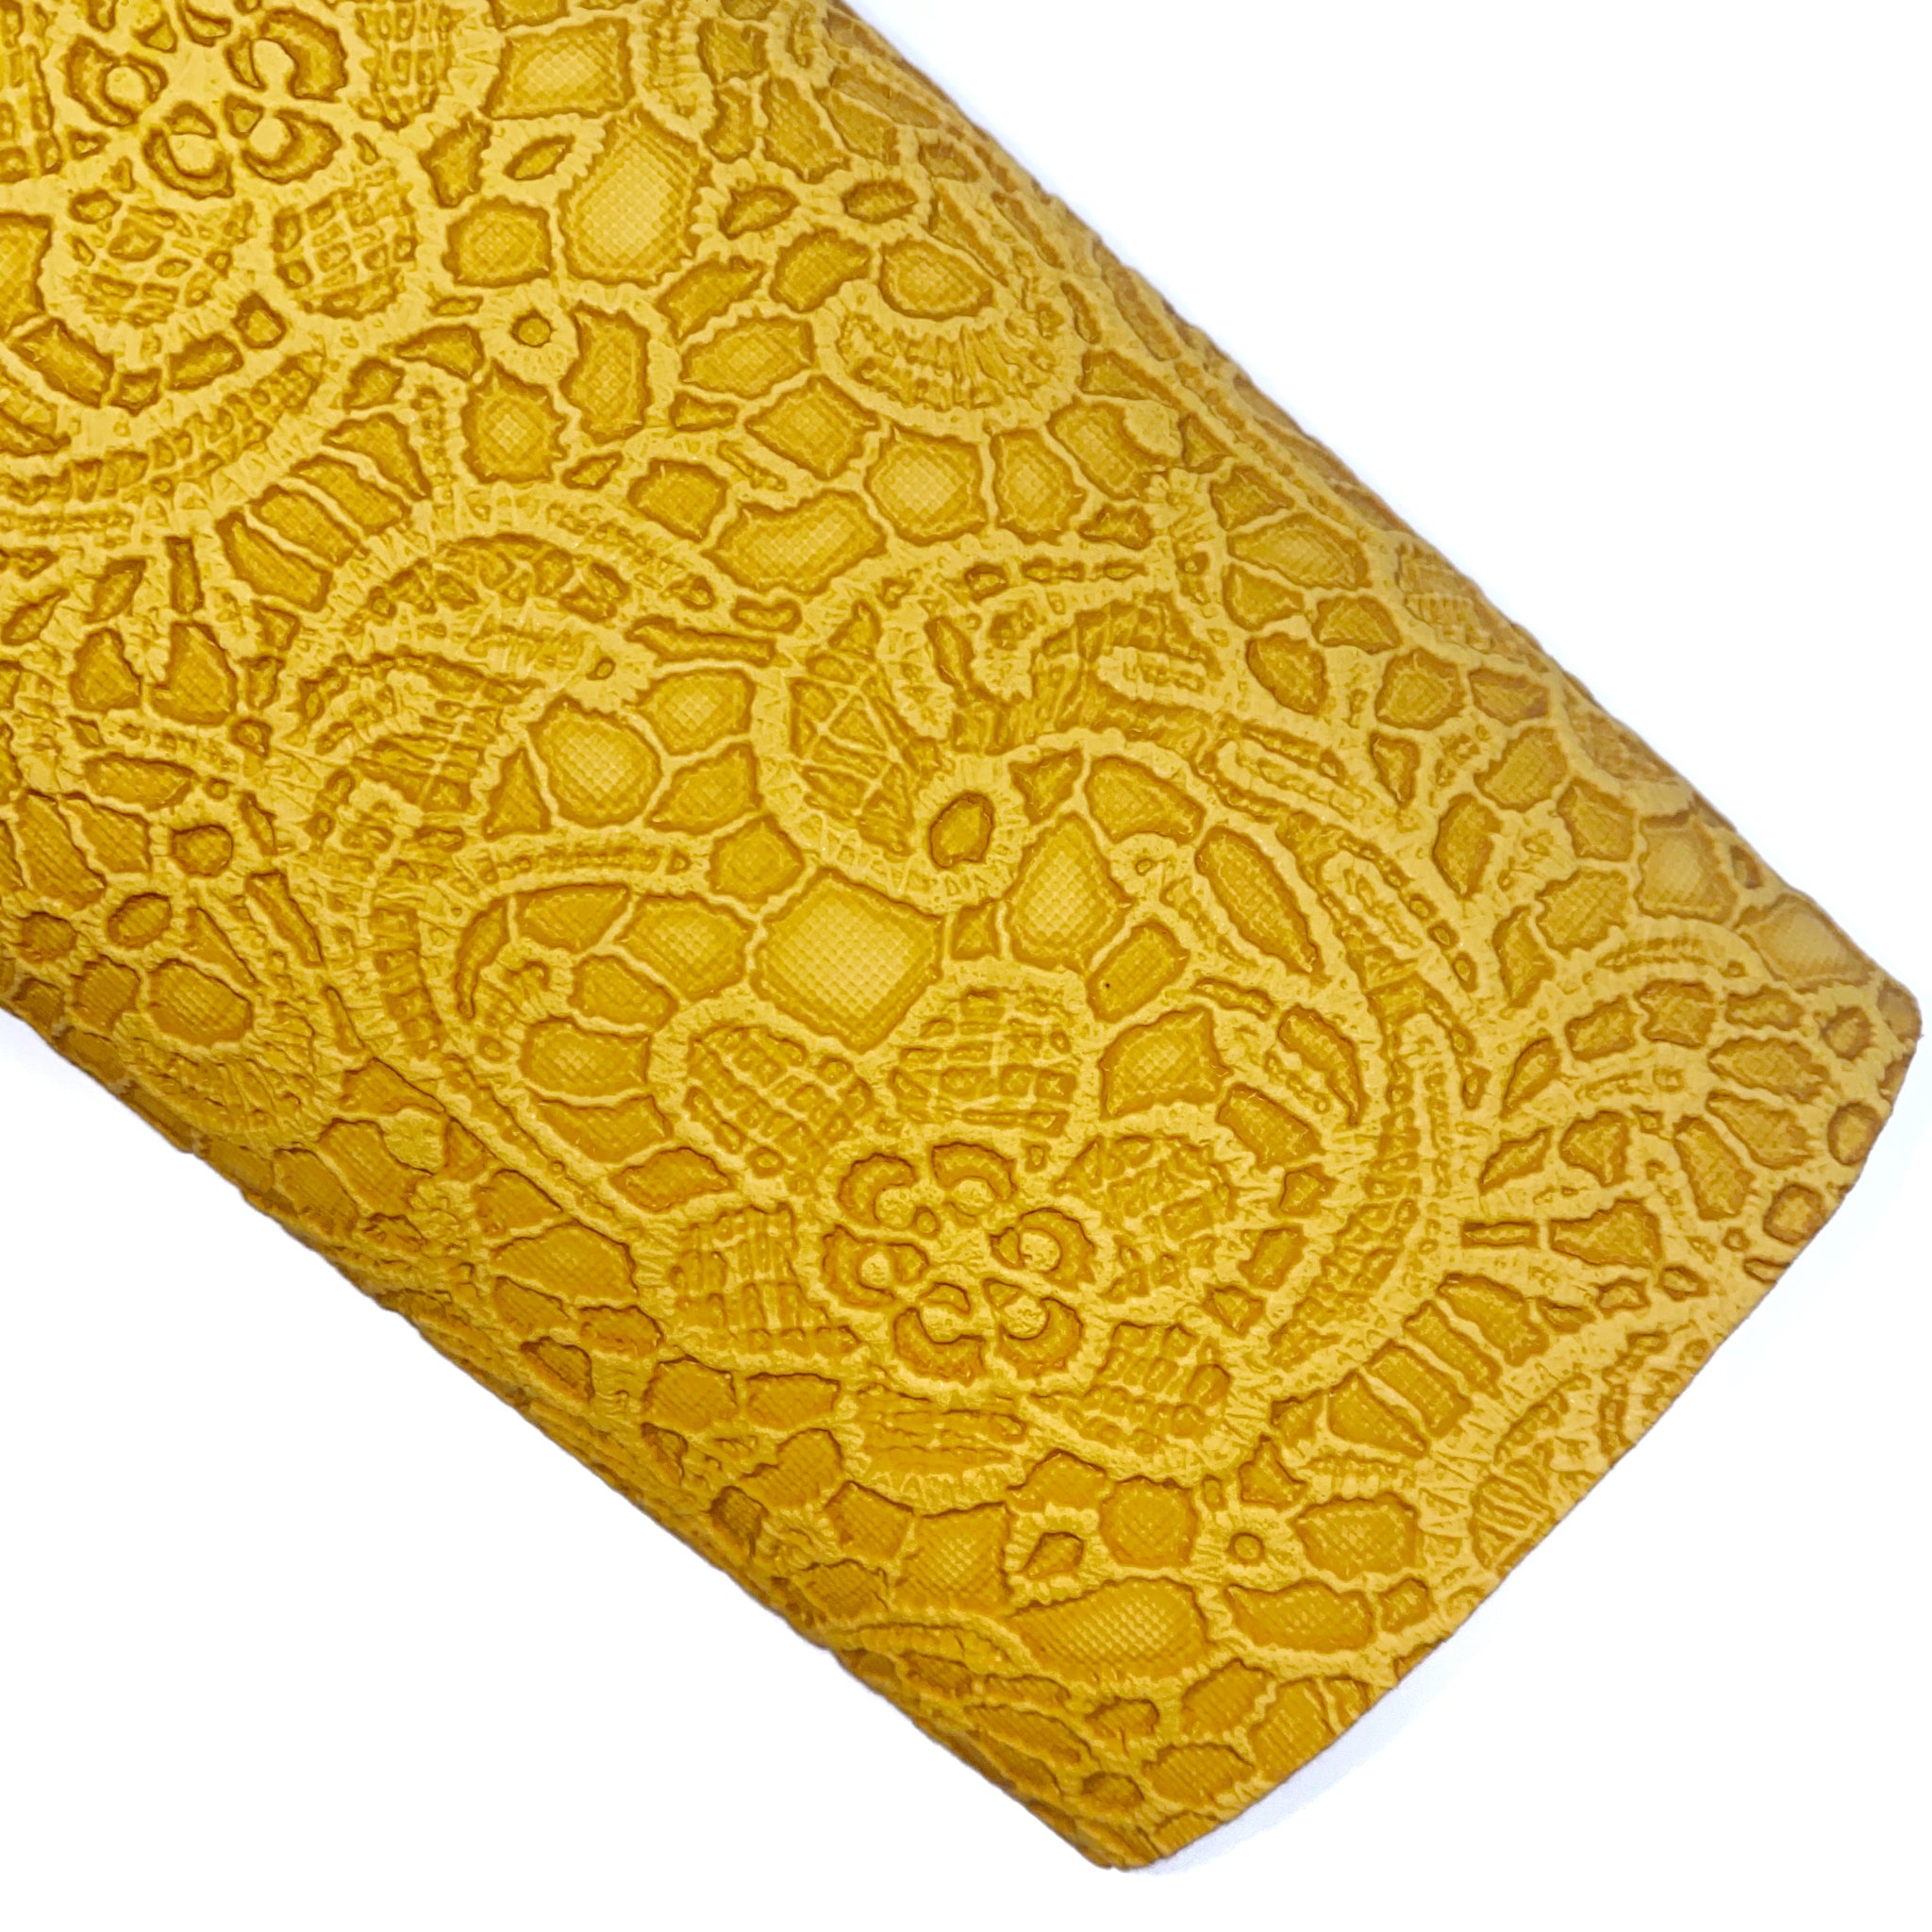 Mustard Embossed Appliqué Lace Faux Leather